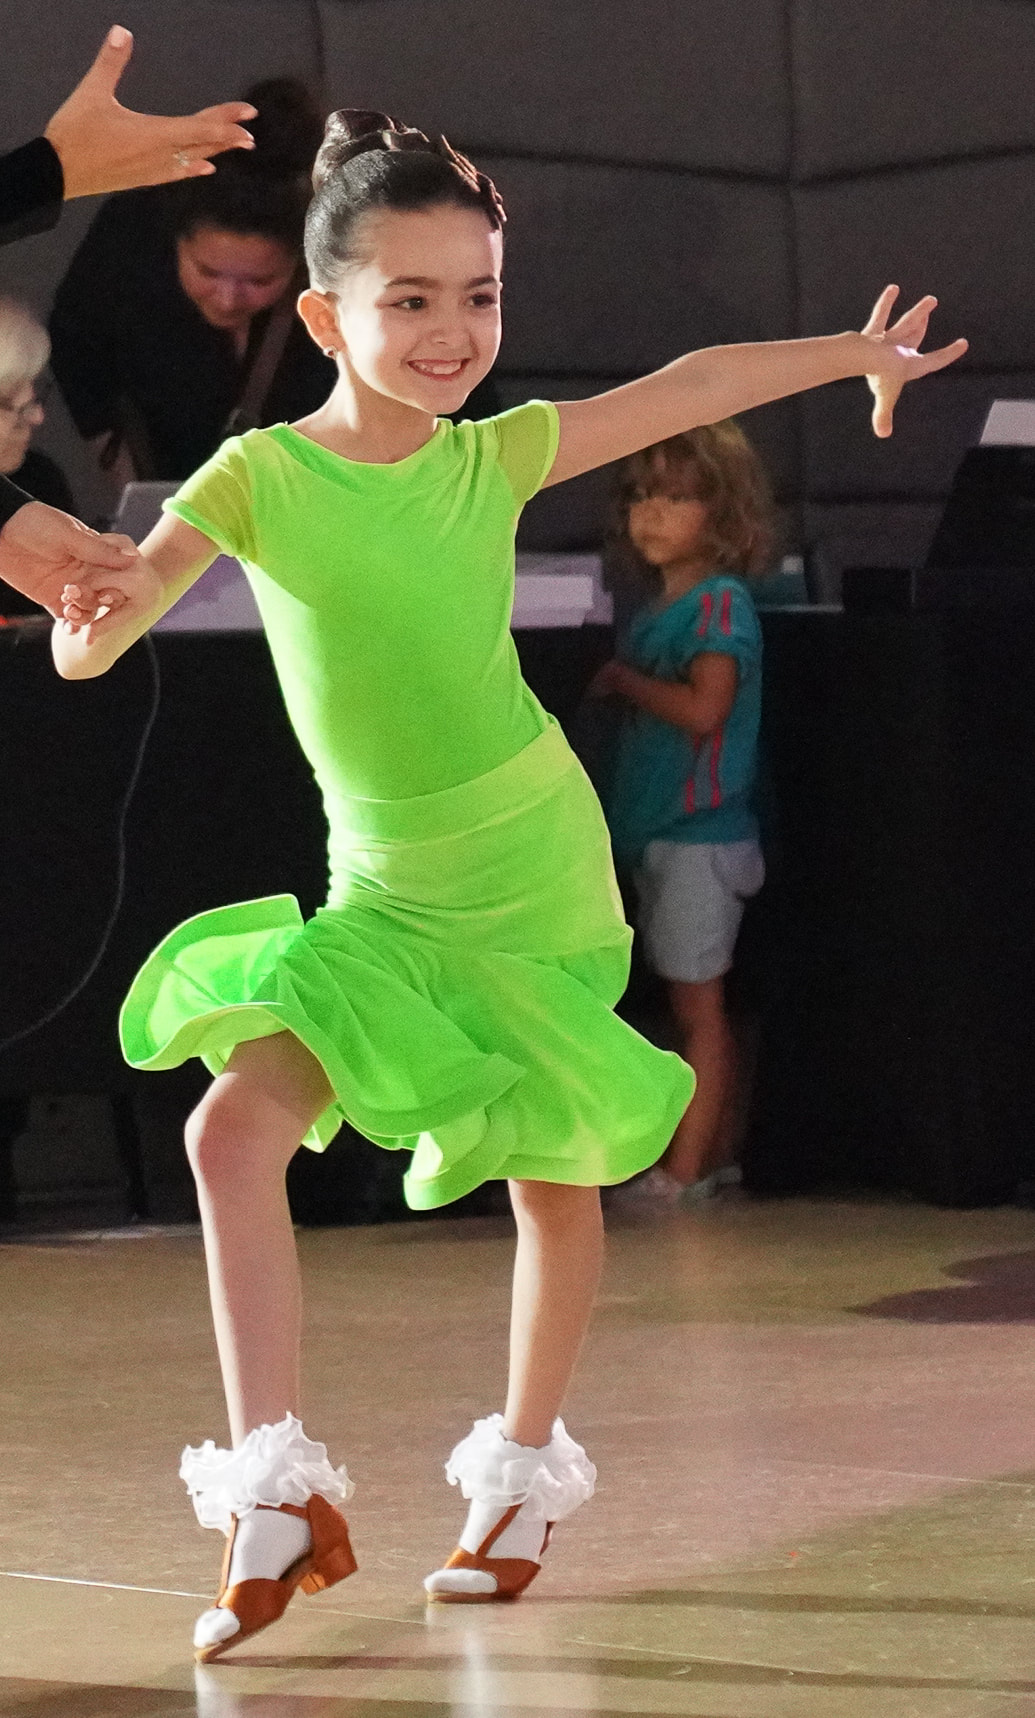 Ella Grace Helton wears a bright green dress while competing at a recent ballroom dancing competition.